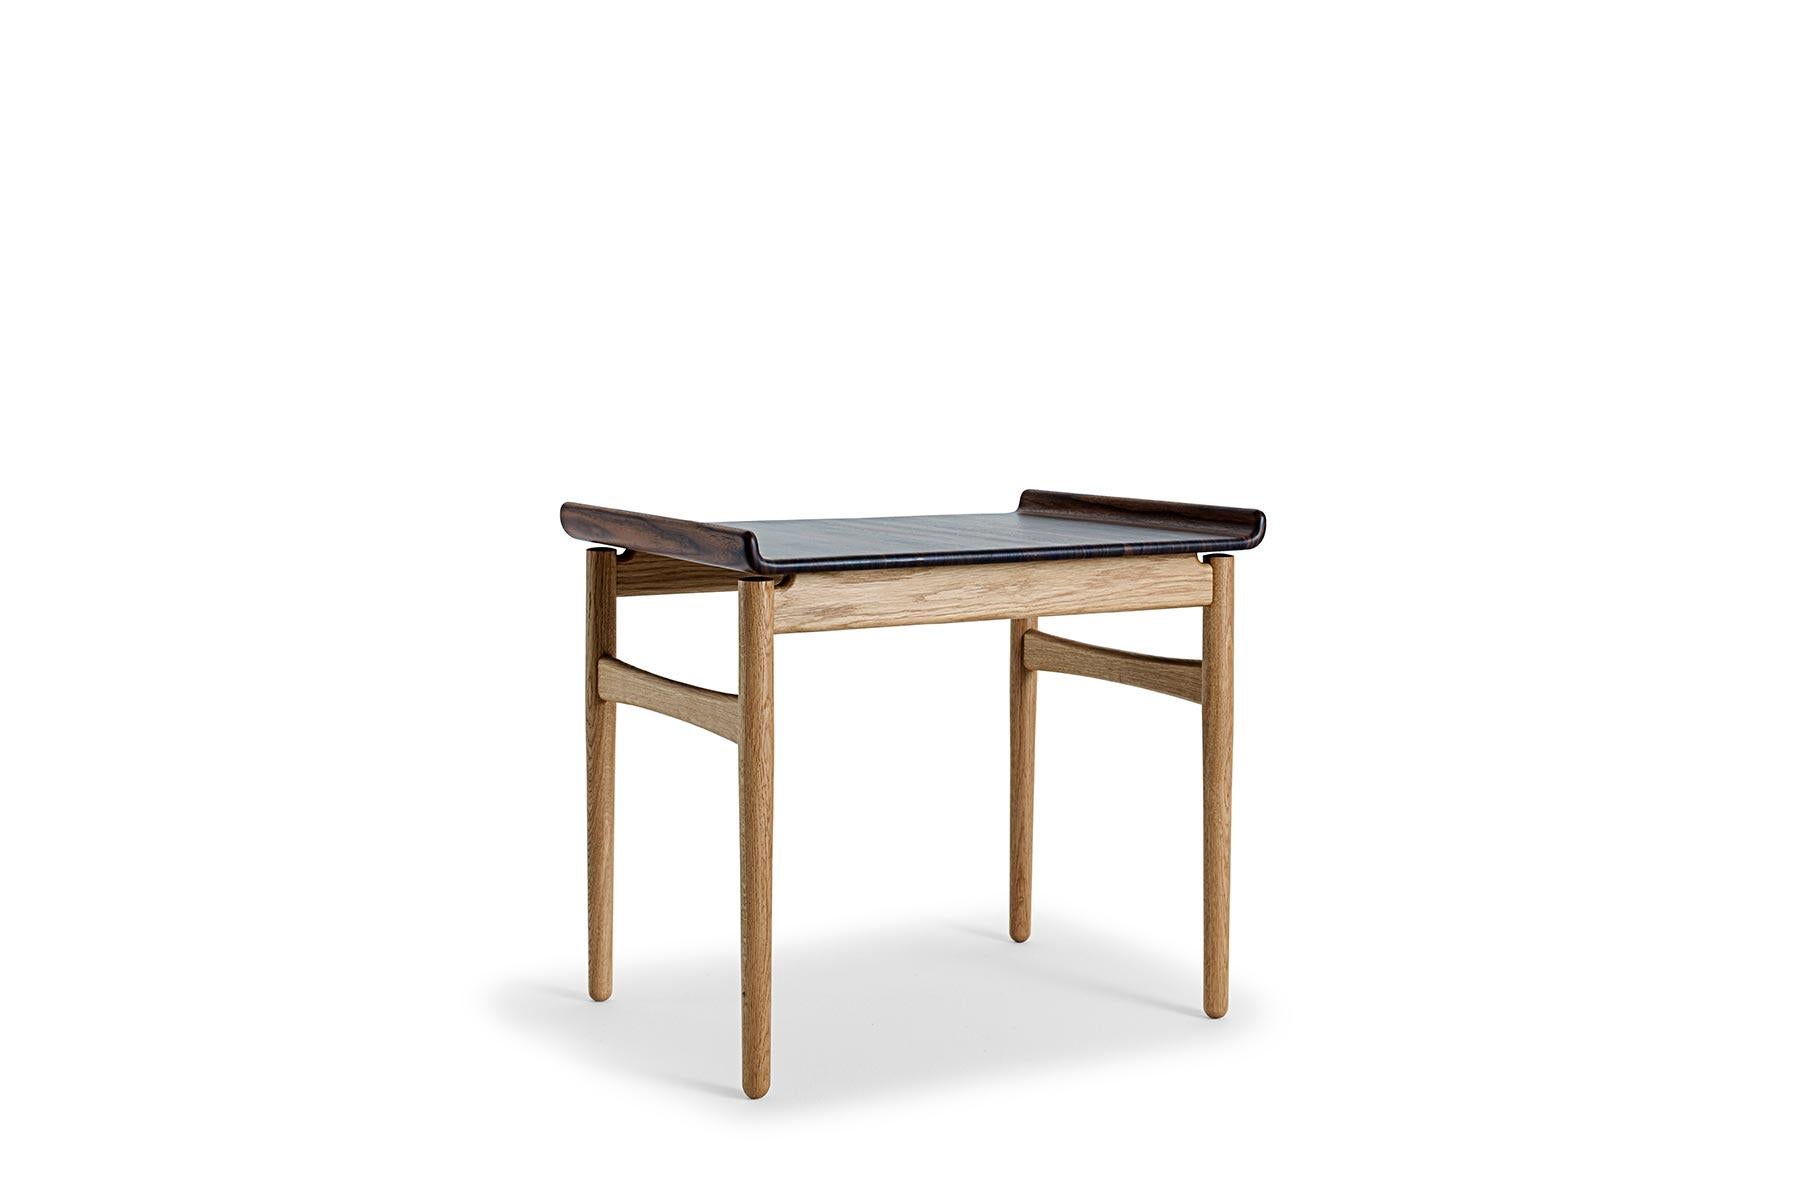 Designed by Hans Wegner for GETAMA in 1980, the 83/88 coffee table features unparalleled craftsmanship. This table is hand built at GETAMA’s factory in Gedsted, Denmark by skilled cabinetmakers using traditional Scandinavian techniques.

Lead